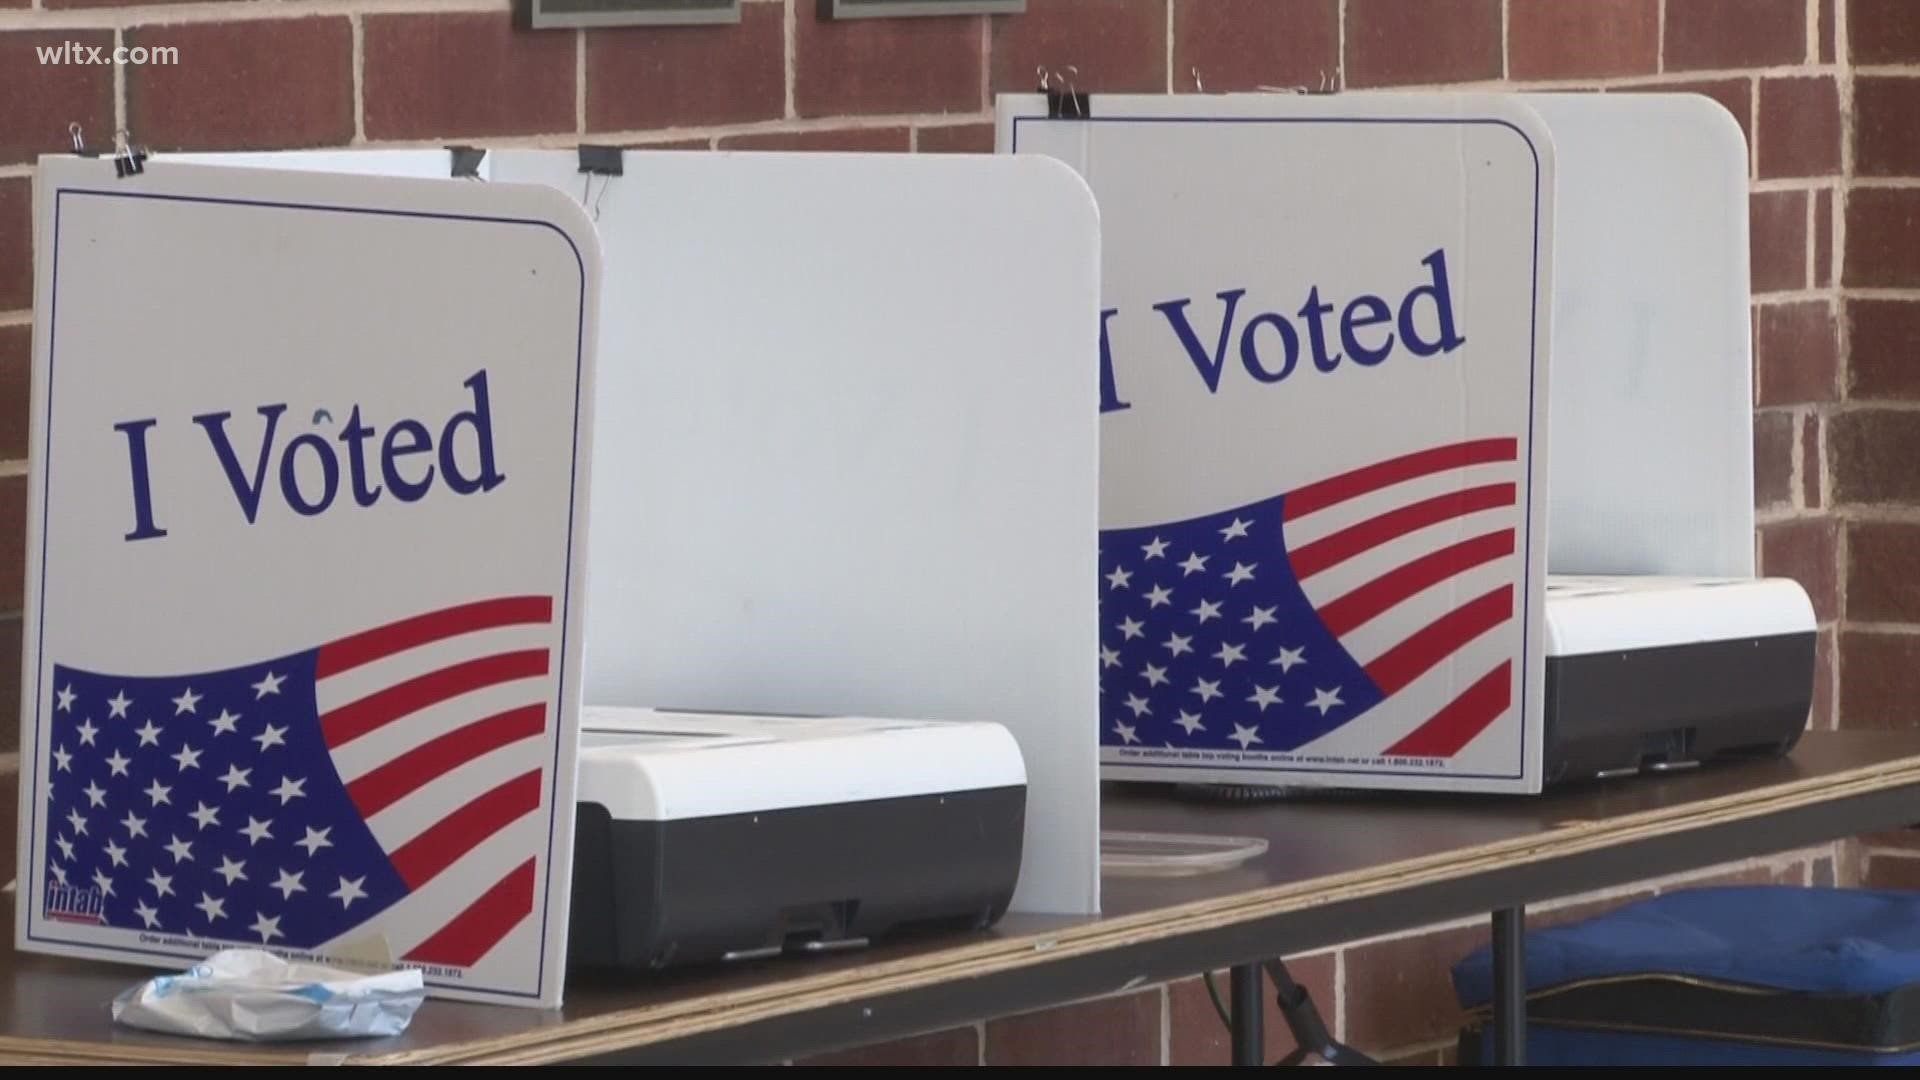 Board of Elections offices across the Midlands are still searching for poll workers as we get closer to election day, and some are searching for more than others.